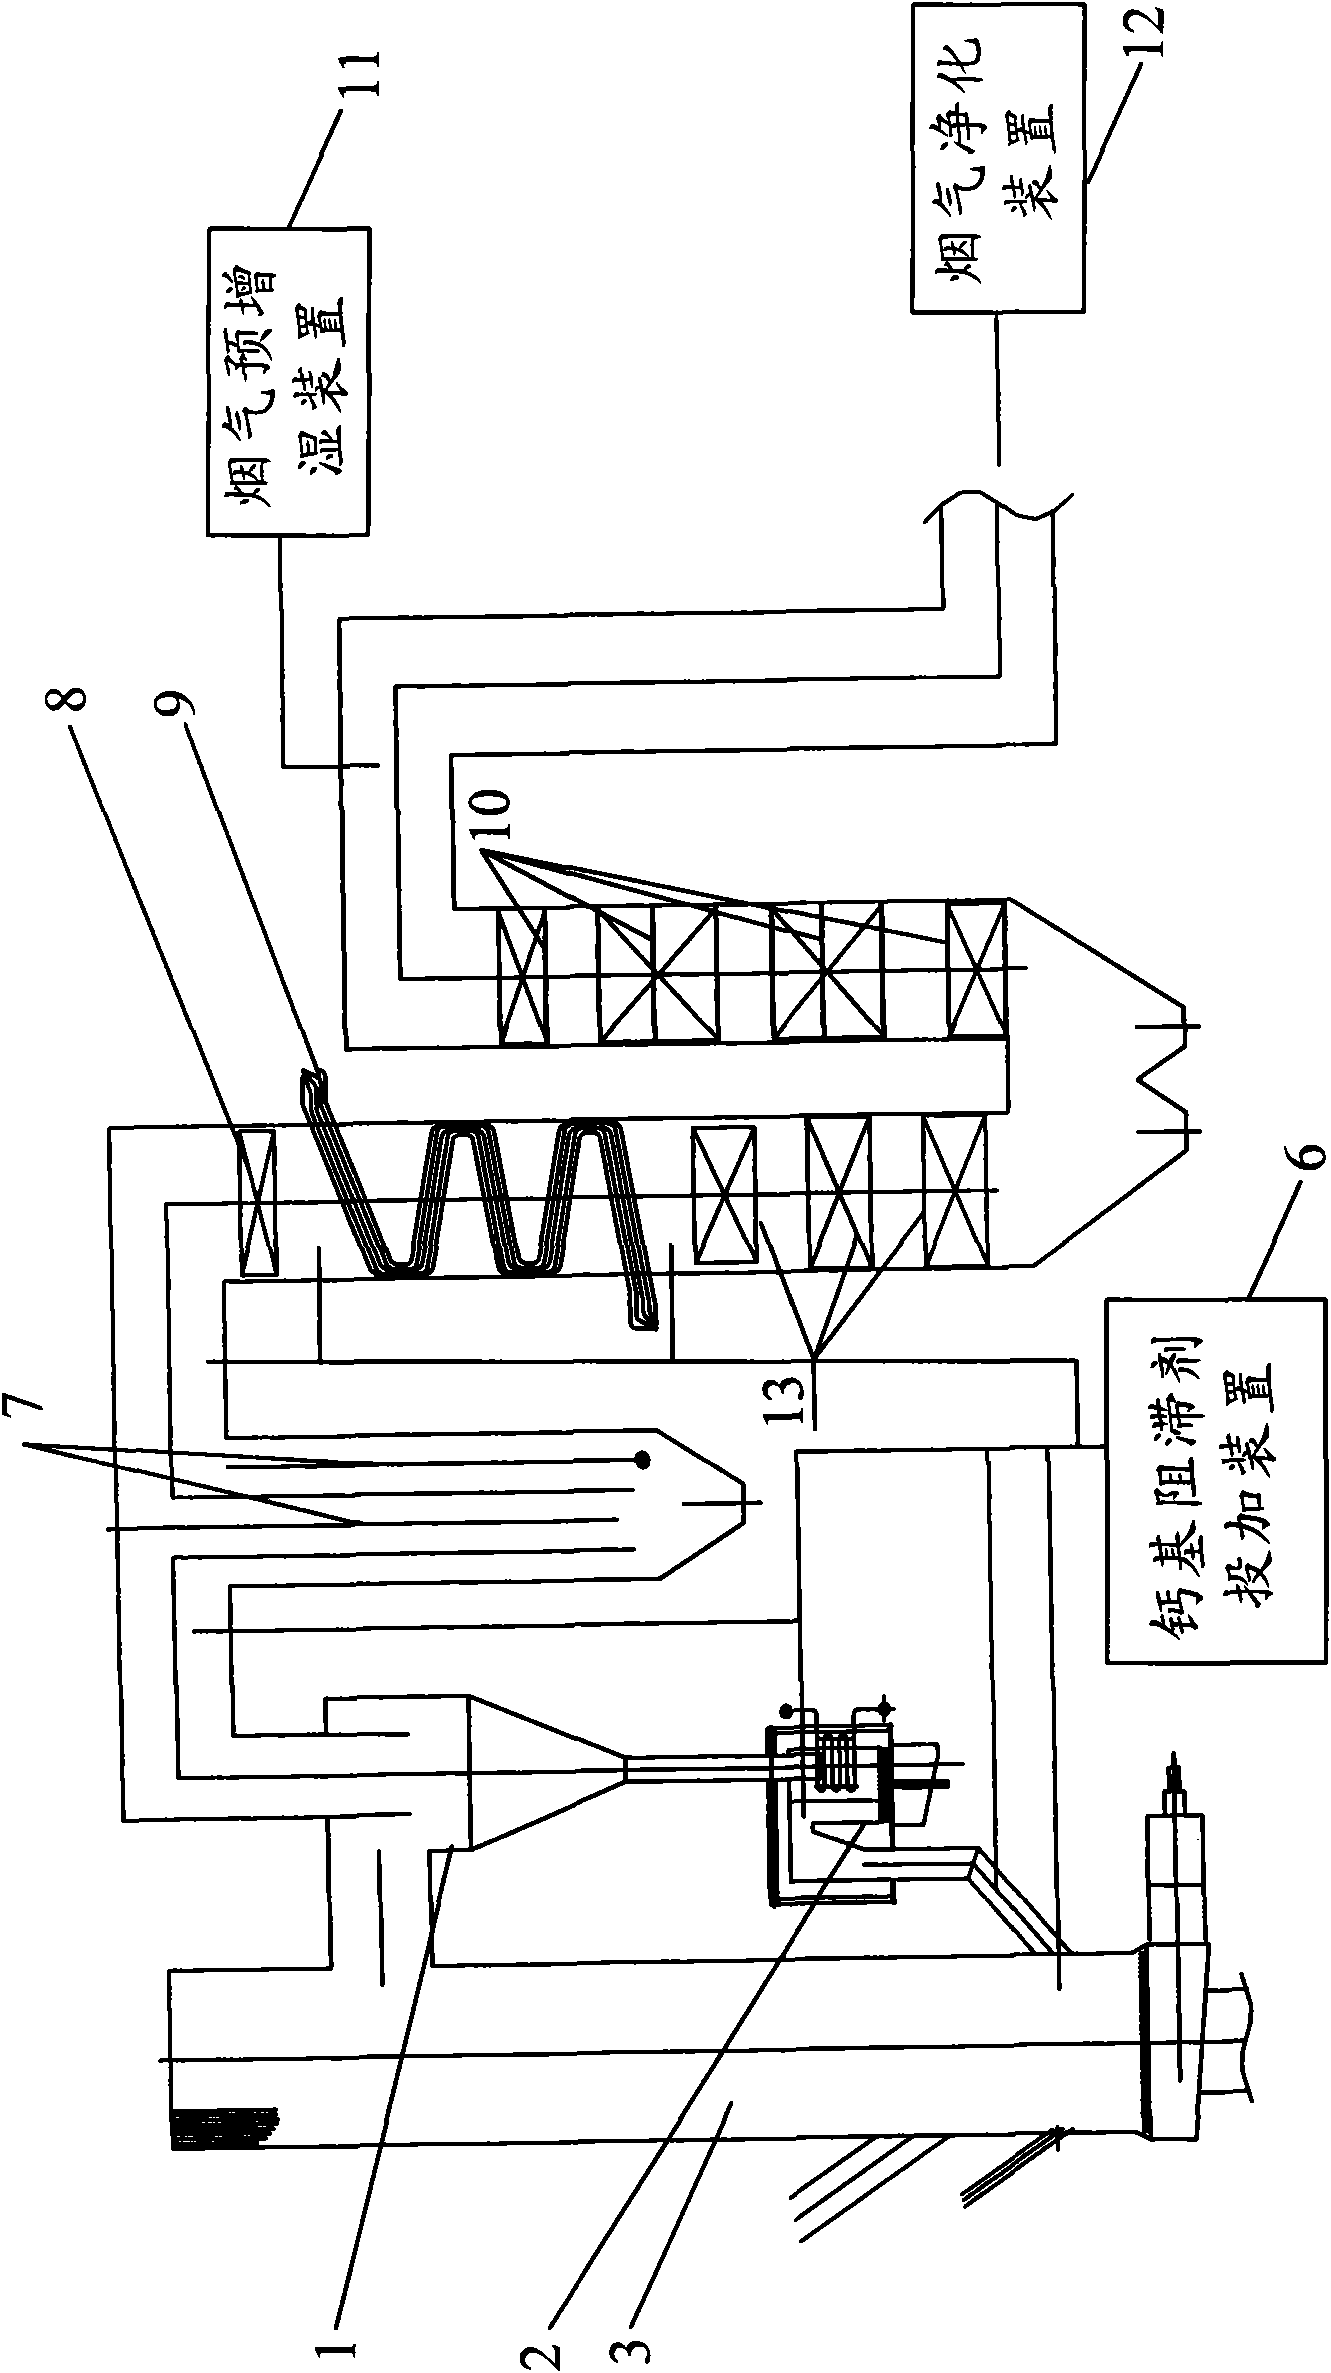 Refuse burning system and method with functions of deacidifying flue gas and retarding dioxin generation